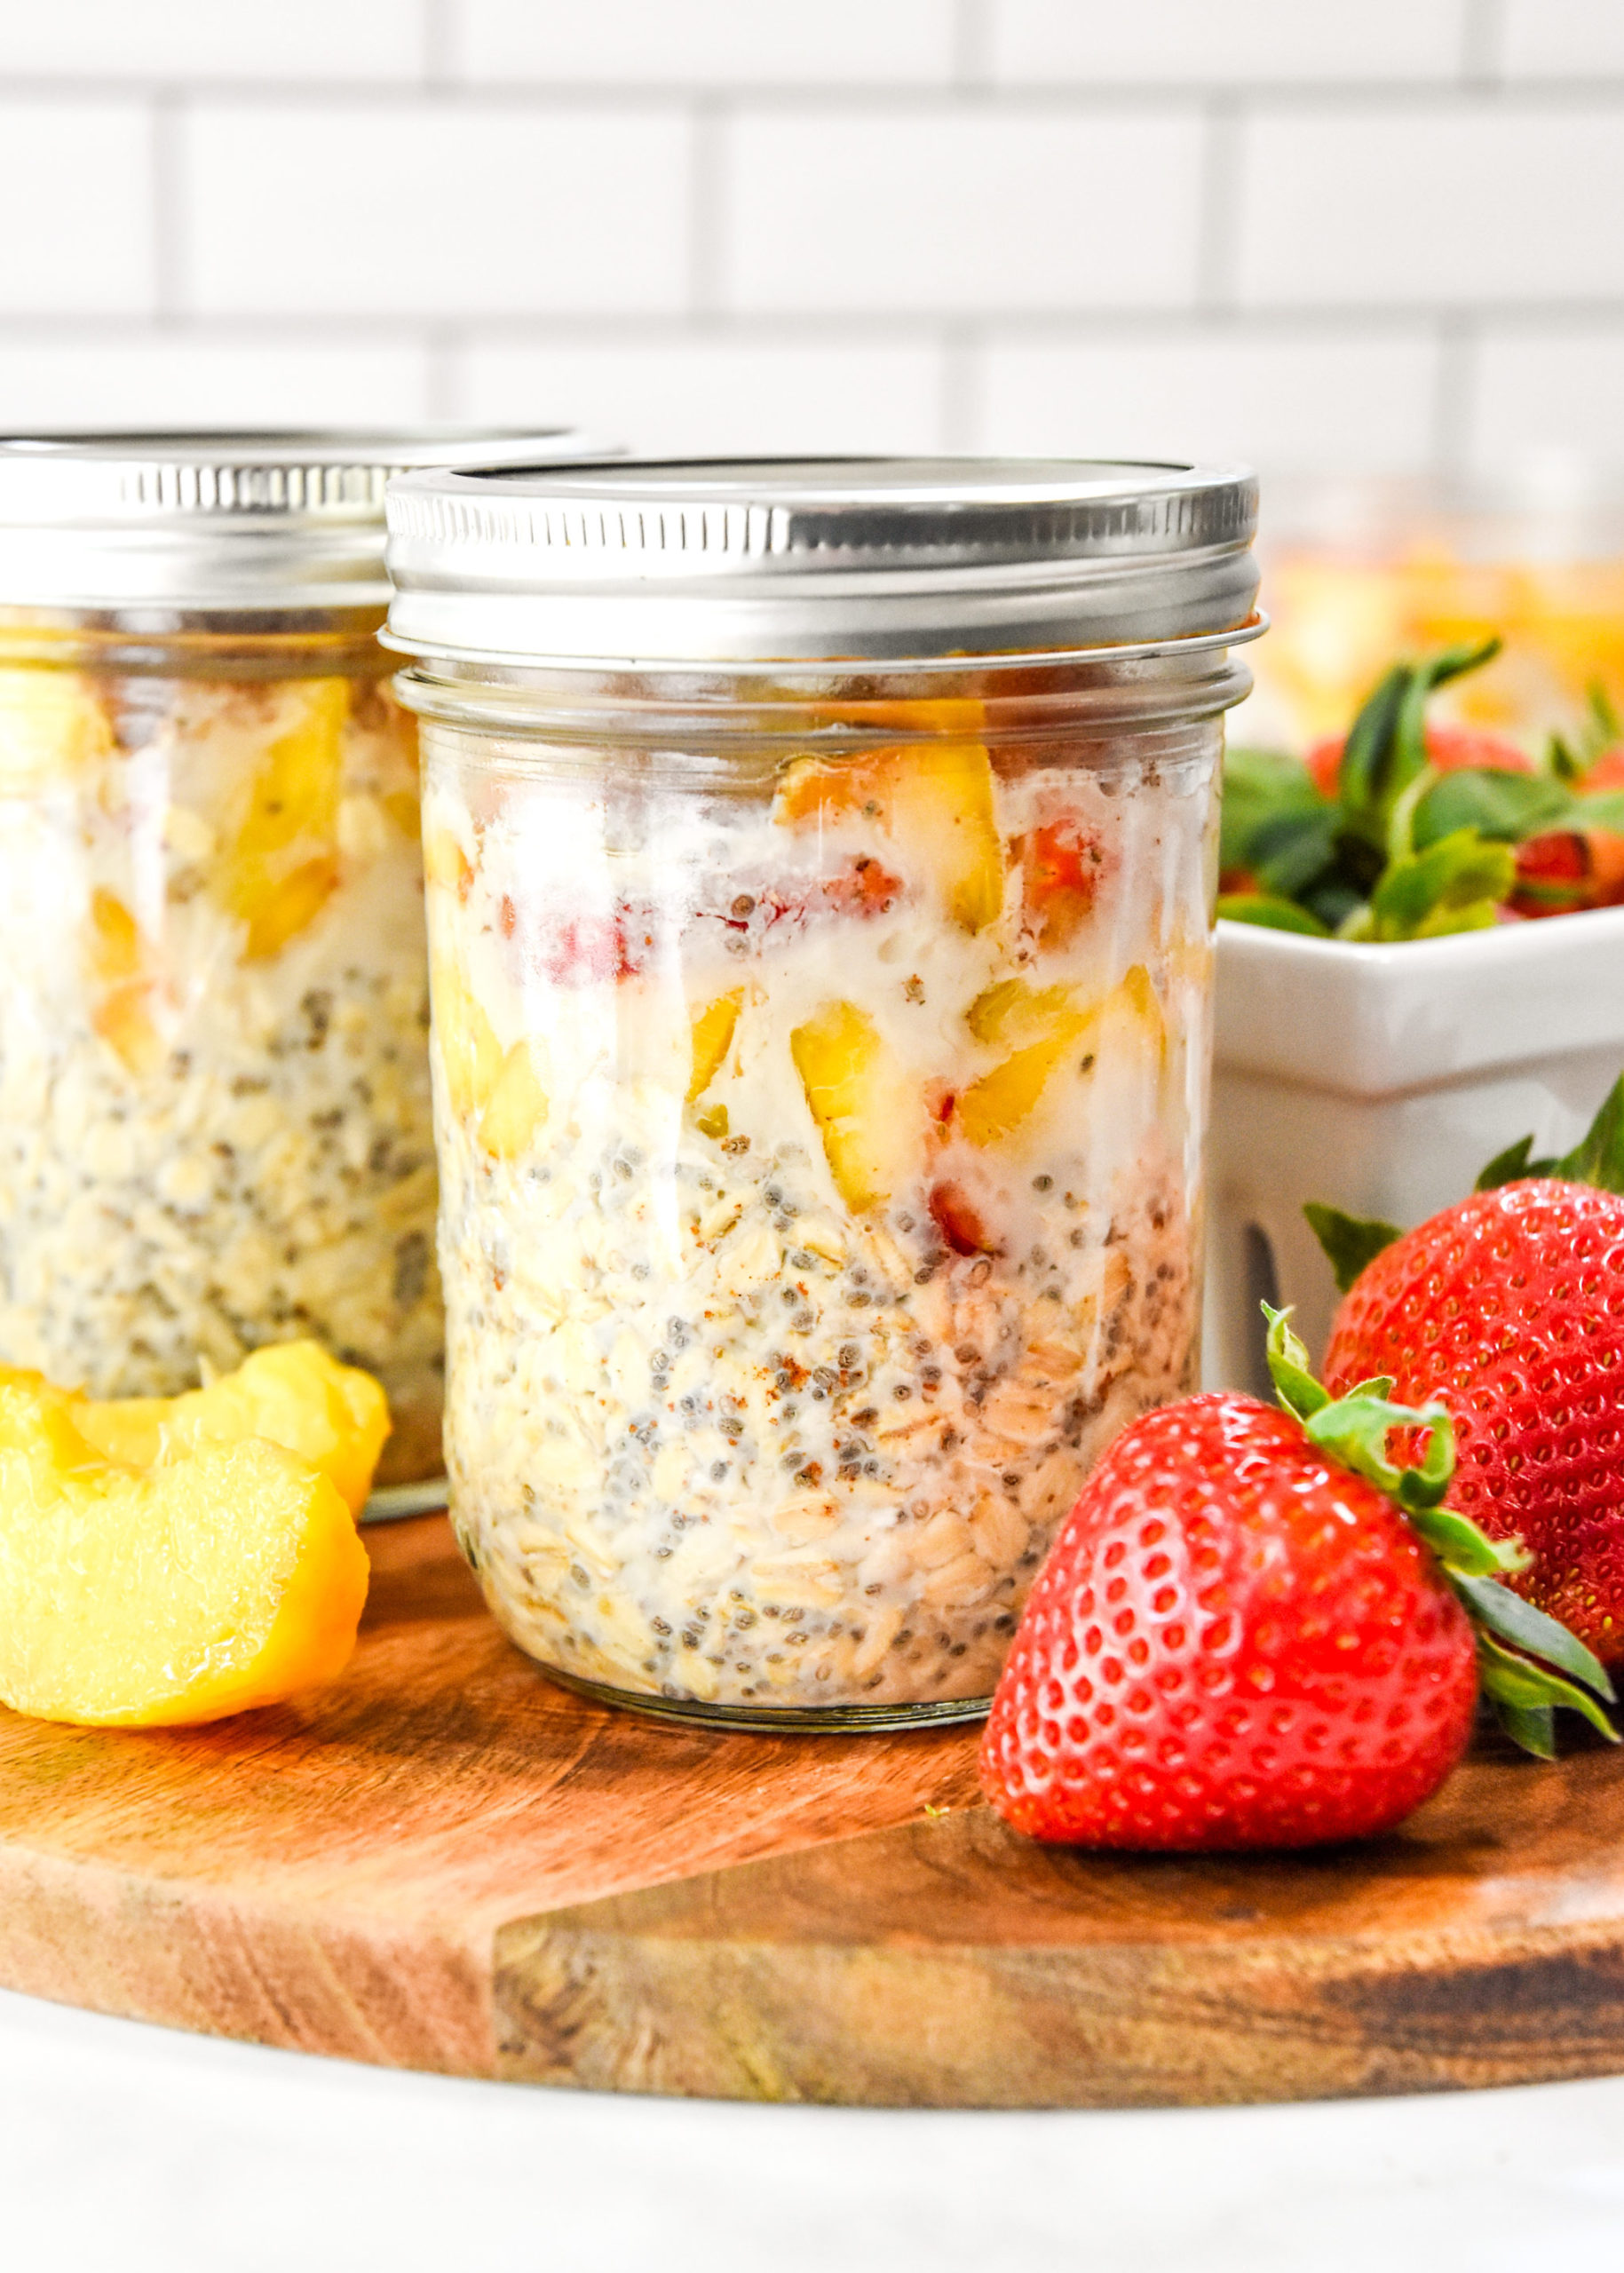 Overnight Oats Container with Lids (Set of 4) plus the Spoon - Perfect for  meal prep and breakfast on the go, Oatmeal Container To-Go, Overnight Oats